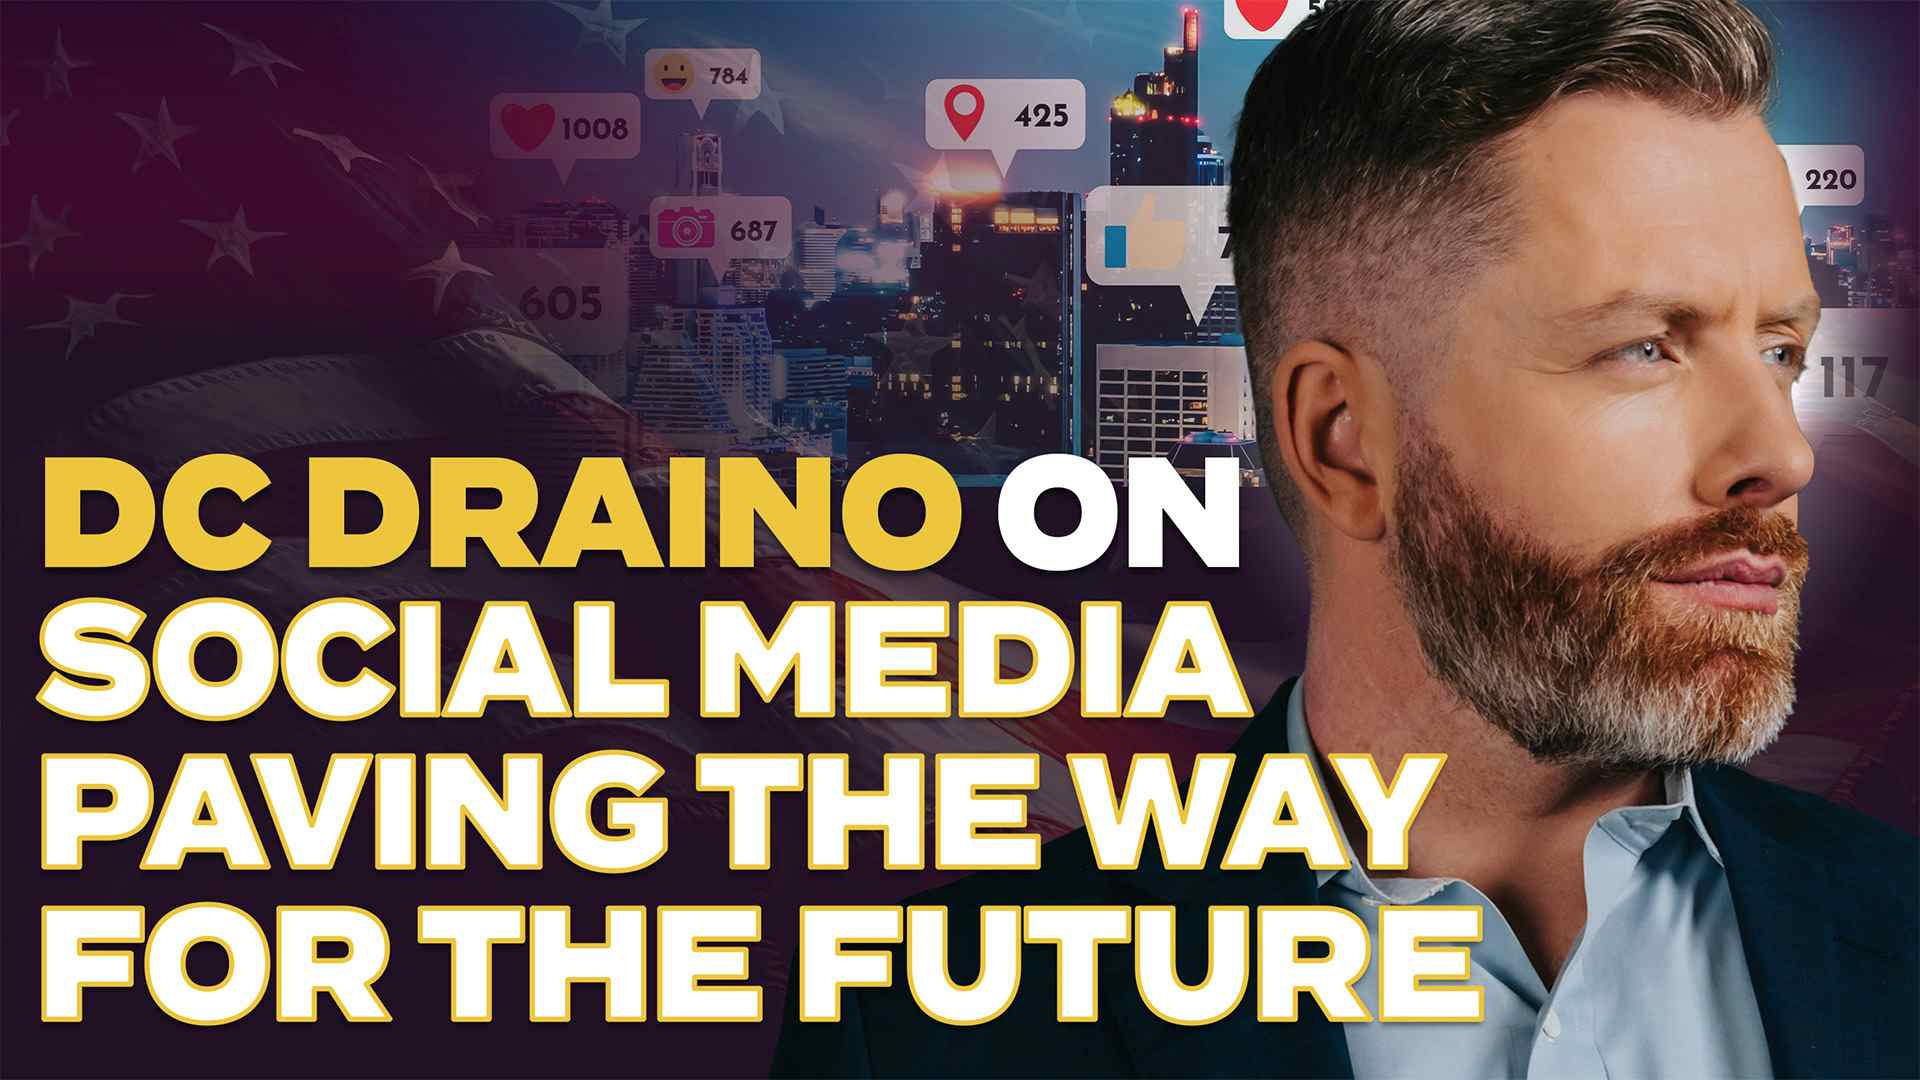 DC Draino on Social Media Paving the Way for the Future